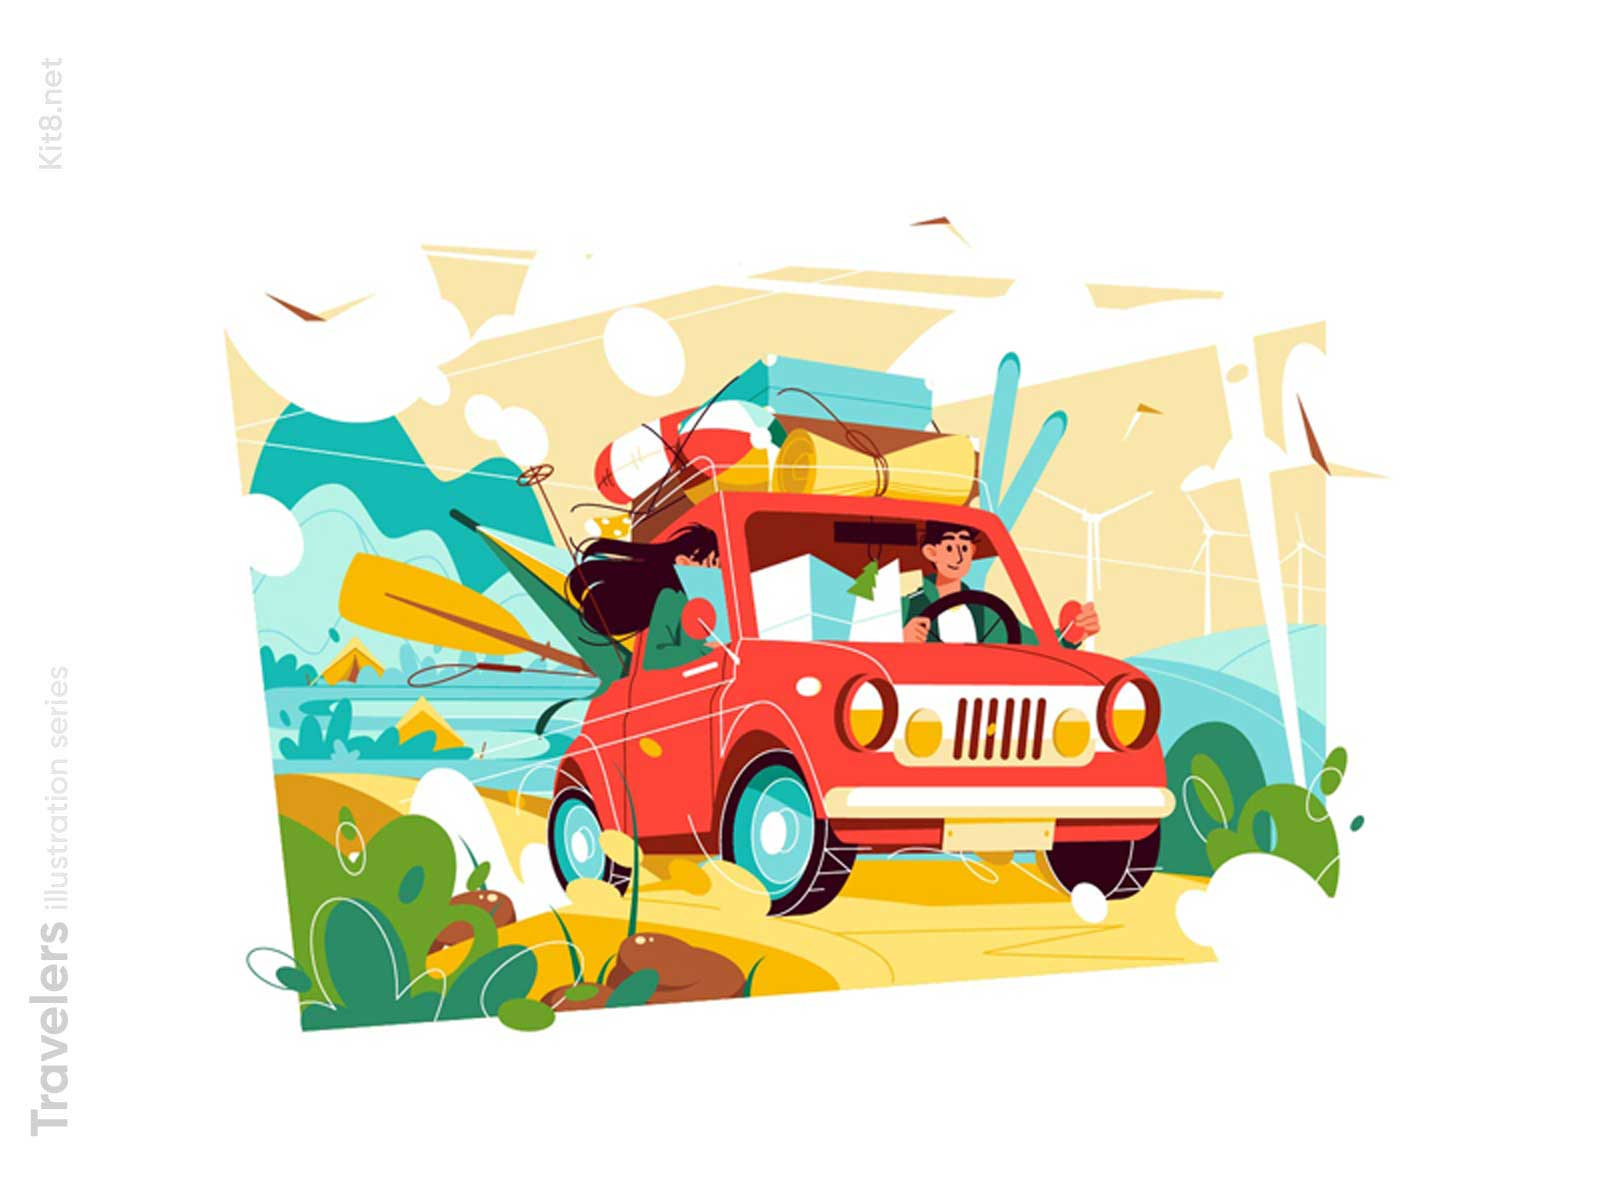 Couple travelling by car illustration by Kit8 on Dribbble